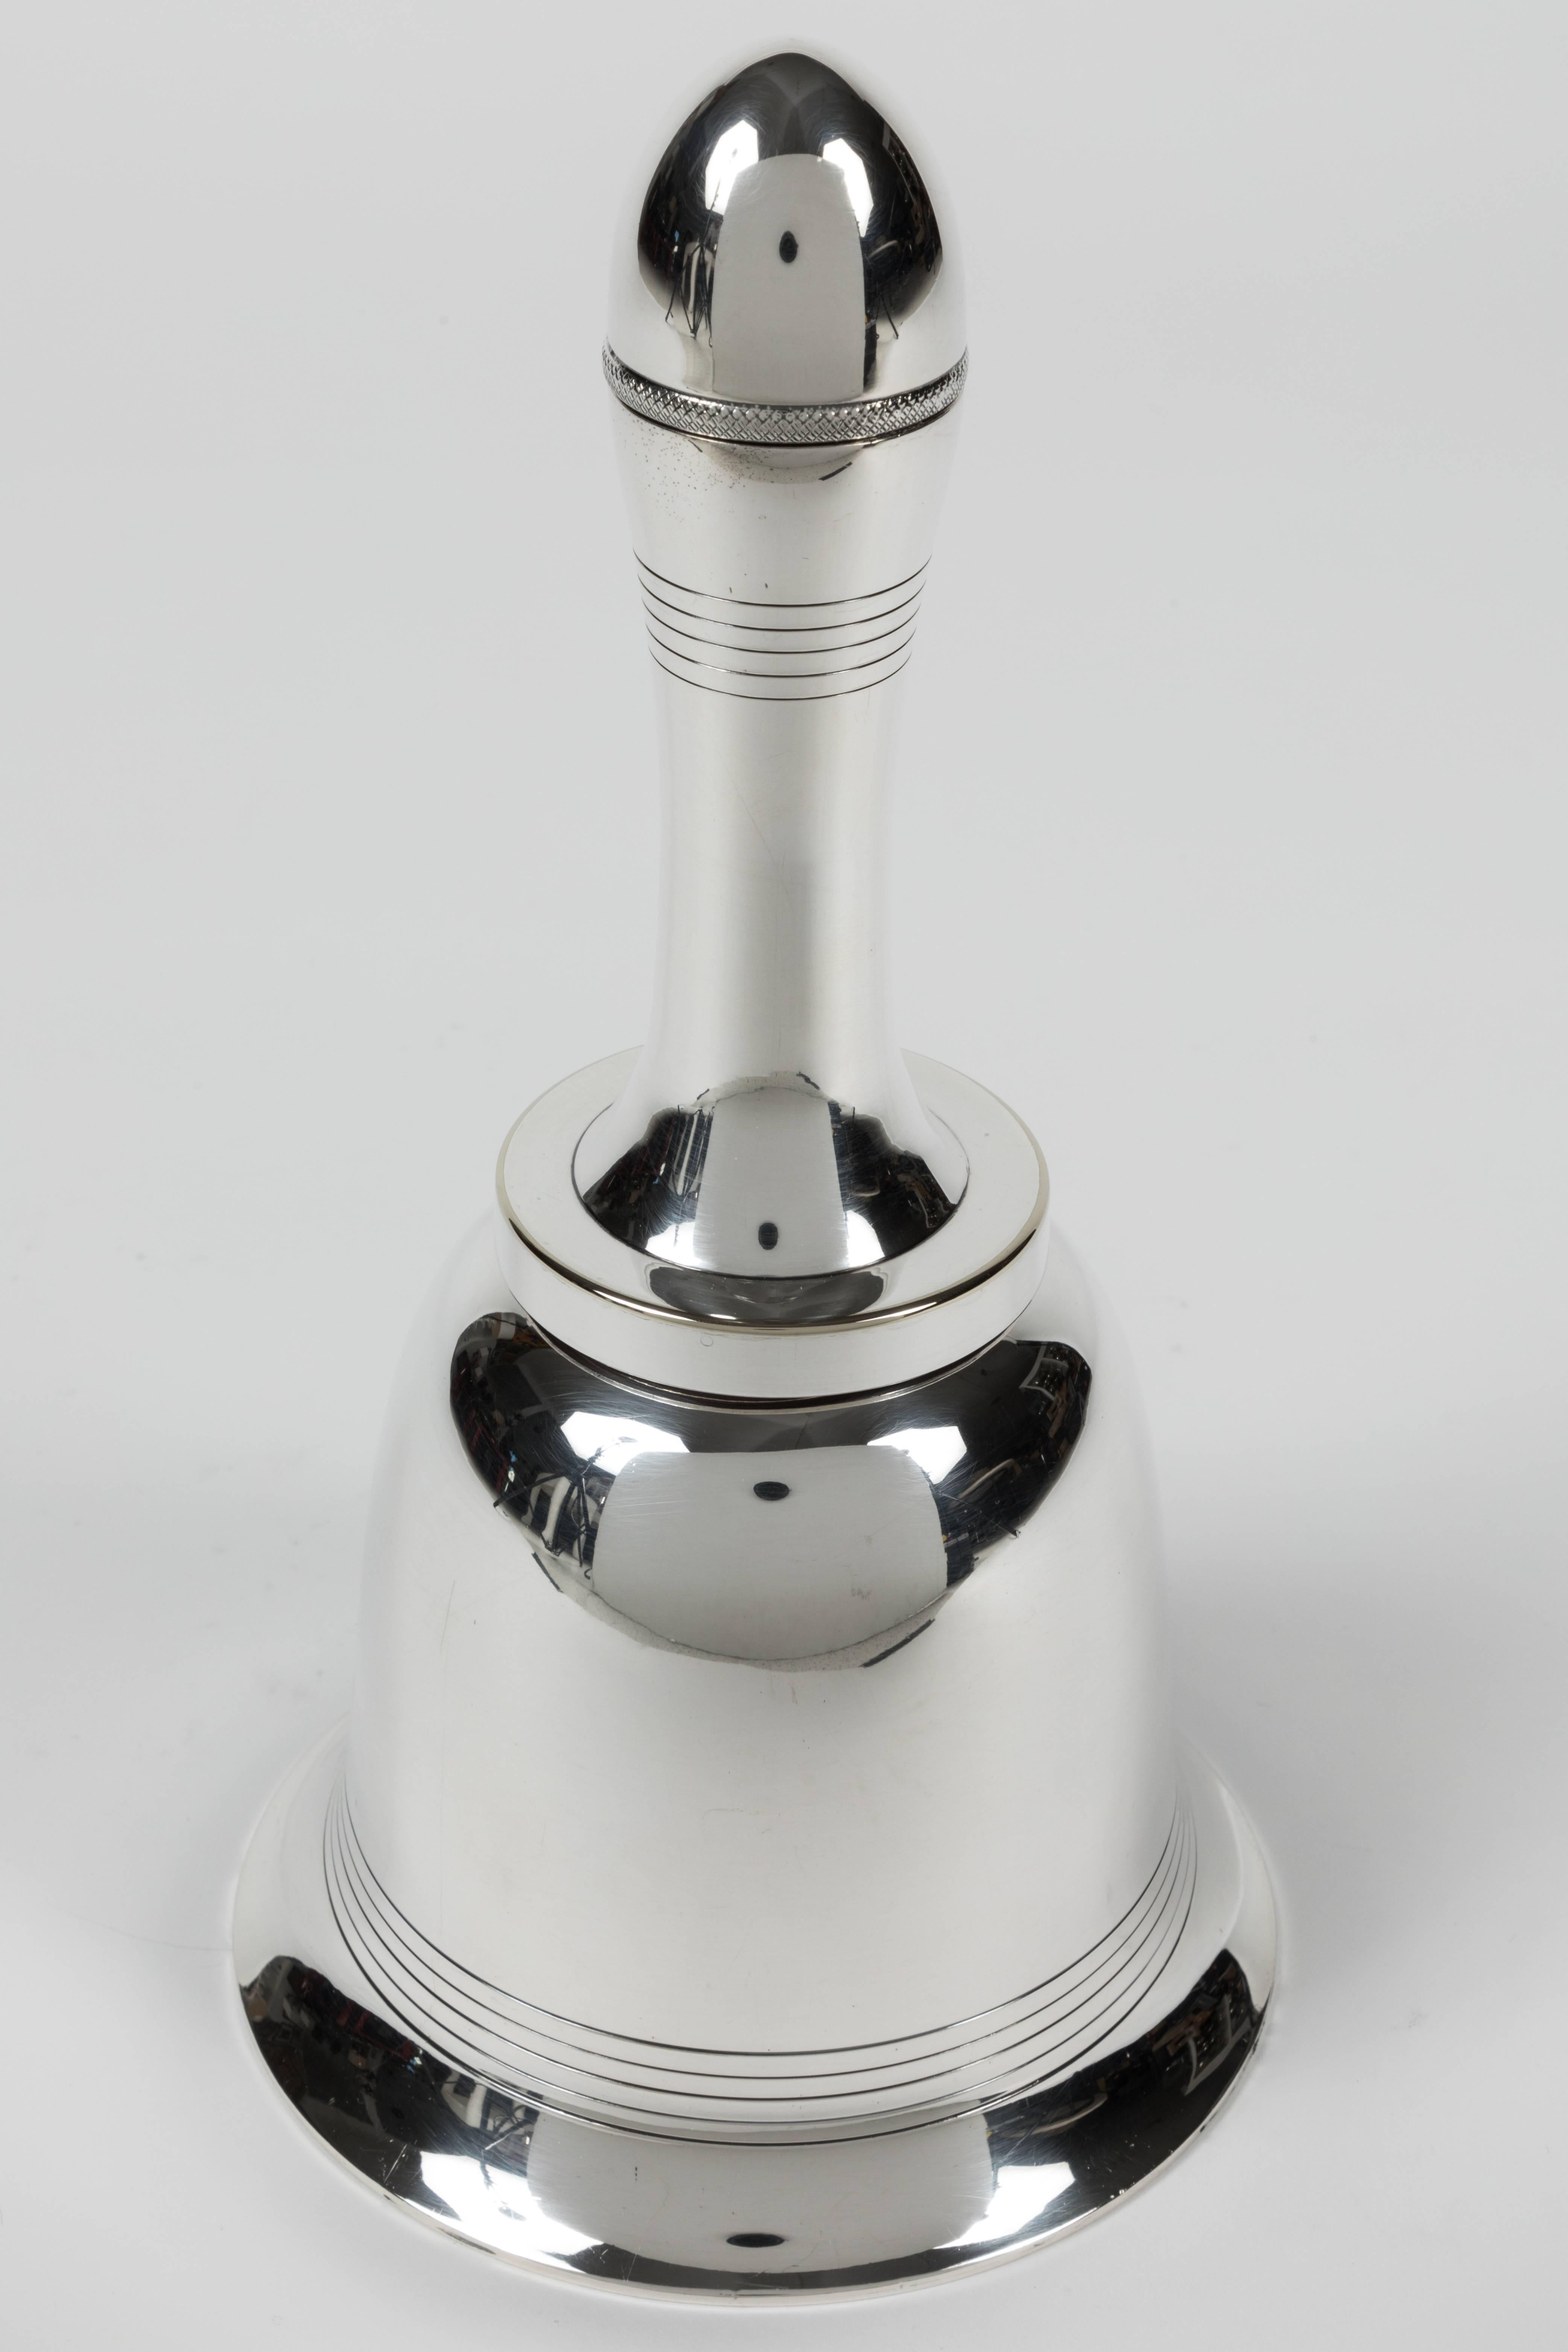 This is a real collector item, this cocktail shaker in the form of a hand bell was designed and made by Asprey & Co in 1935. Bell breaks down into three sections for use. The top unscrews to pour the drinks. Silver plate is in fine condition. Fully